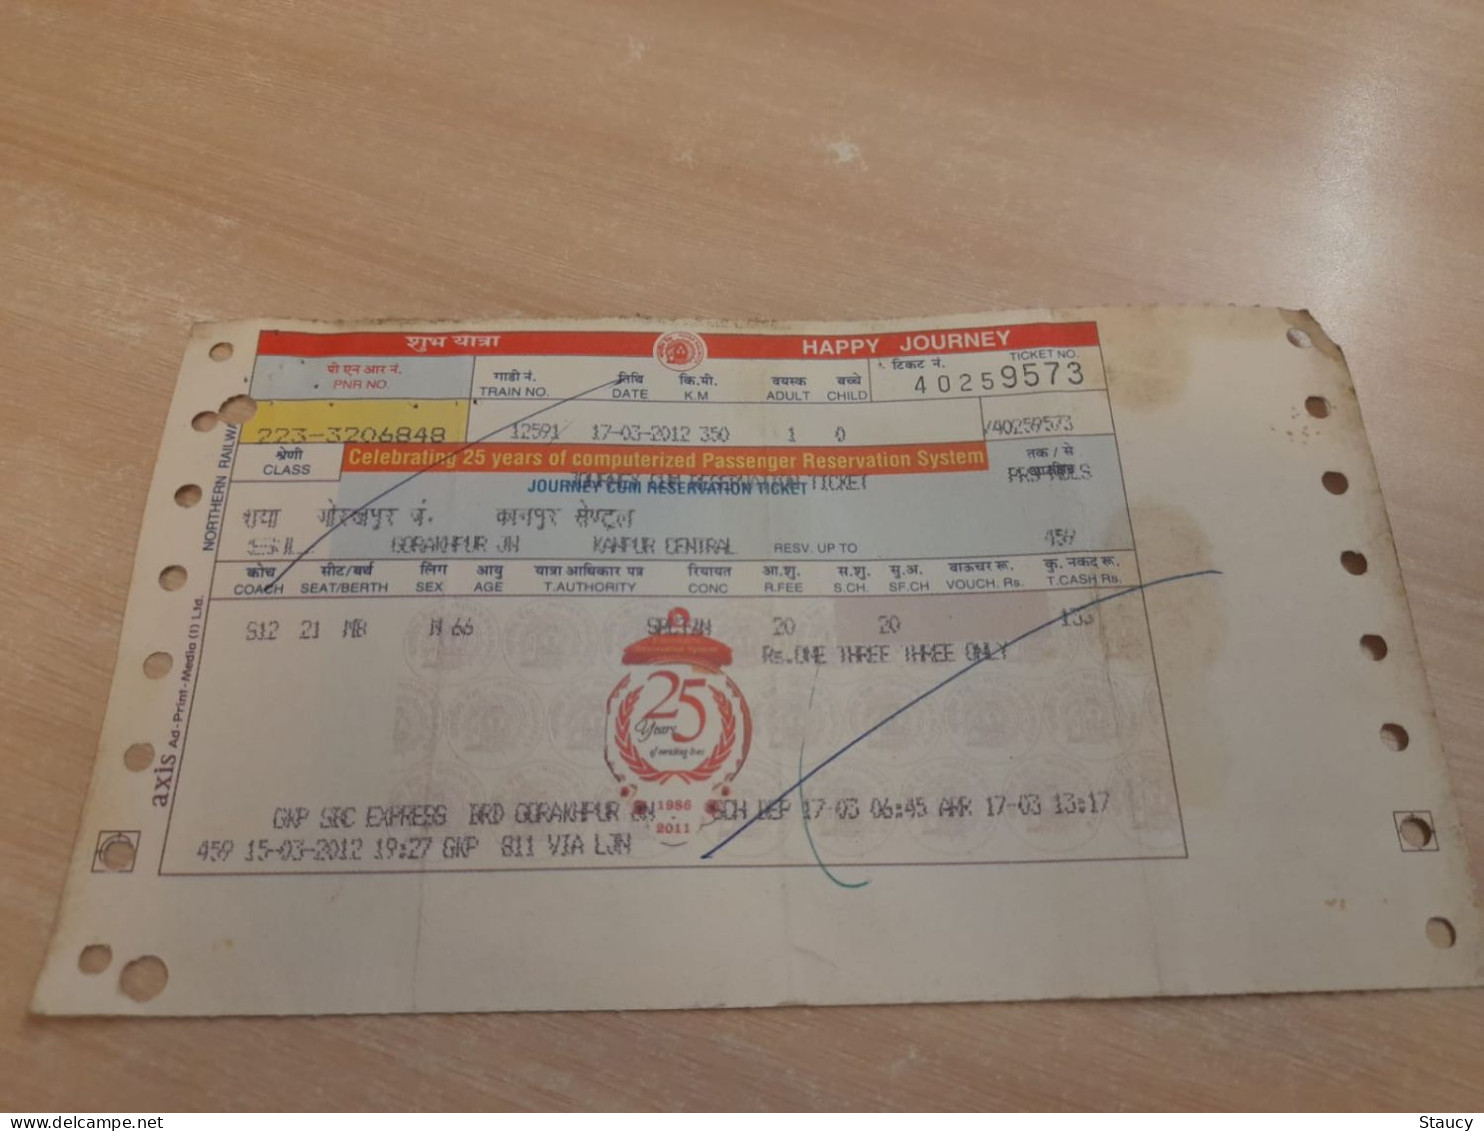 India Old / Vintage - Railway / Train Special Ticket "NORTHERN RAILWAY" Celebrating 25 Years Of C.P.R.System As Per Scan - Mundo